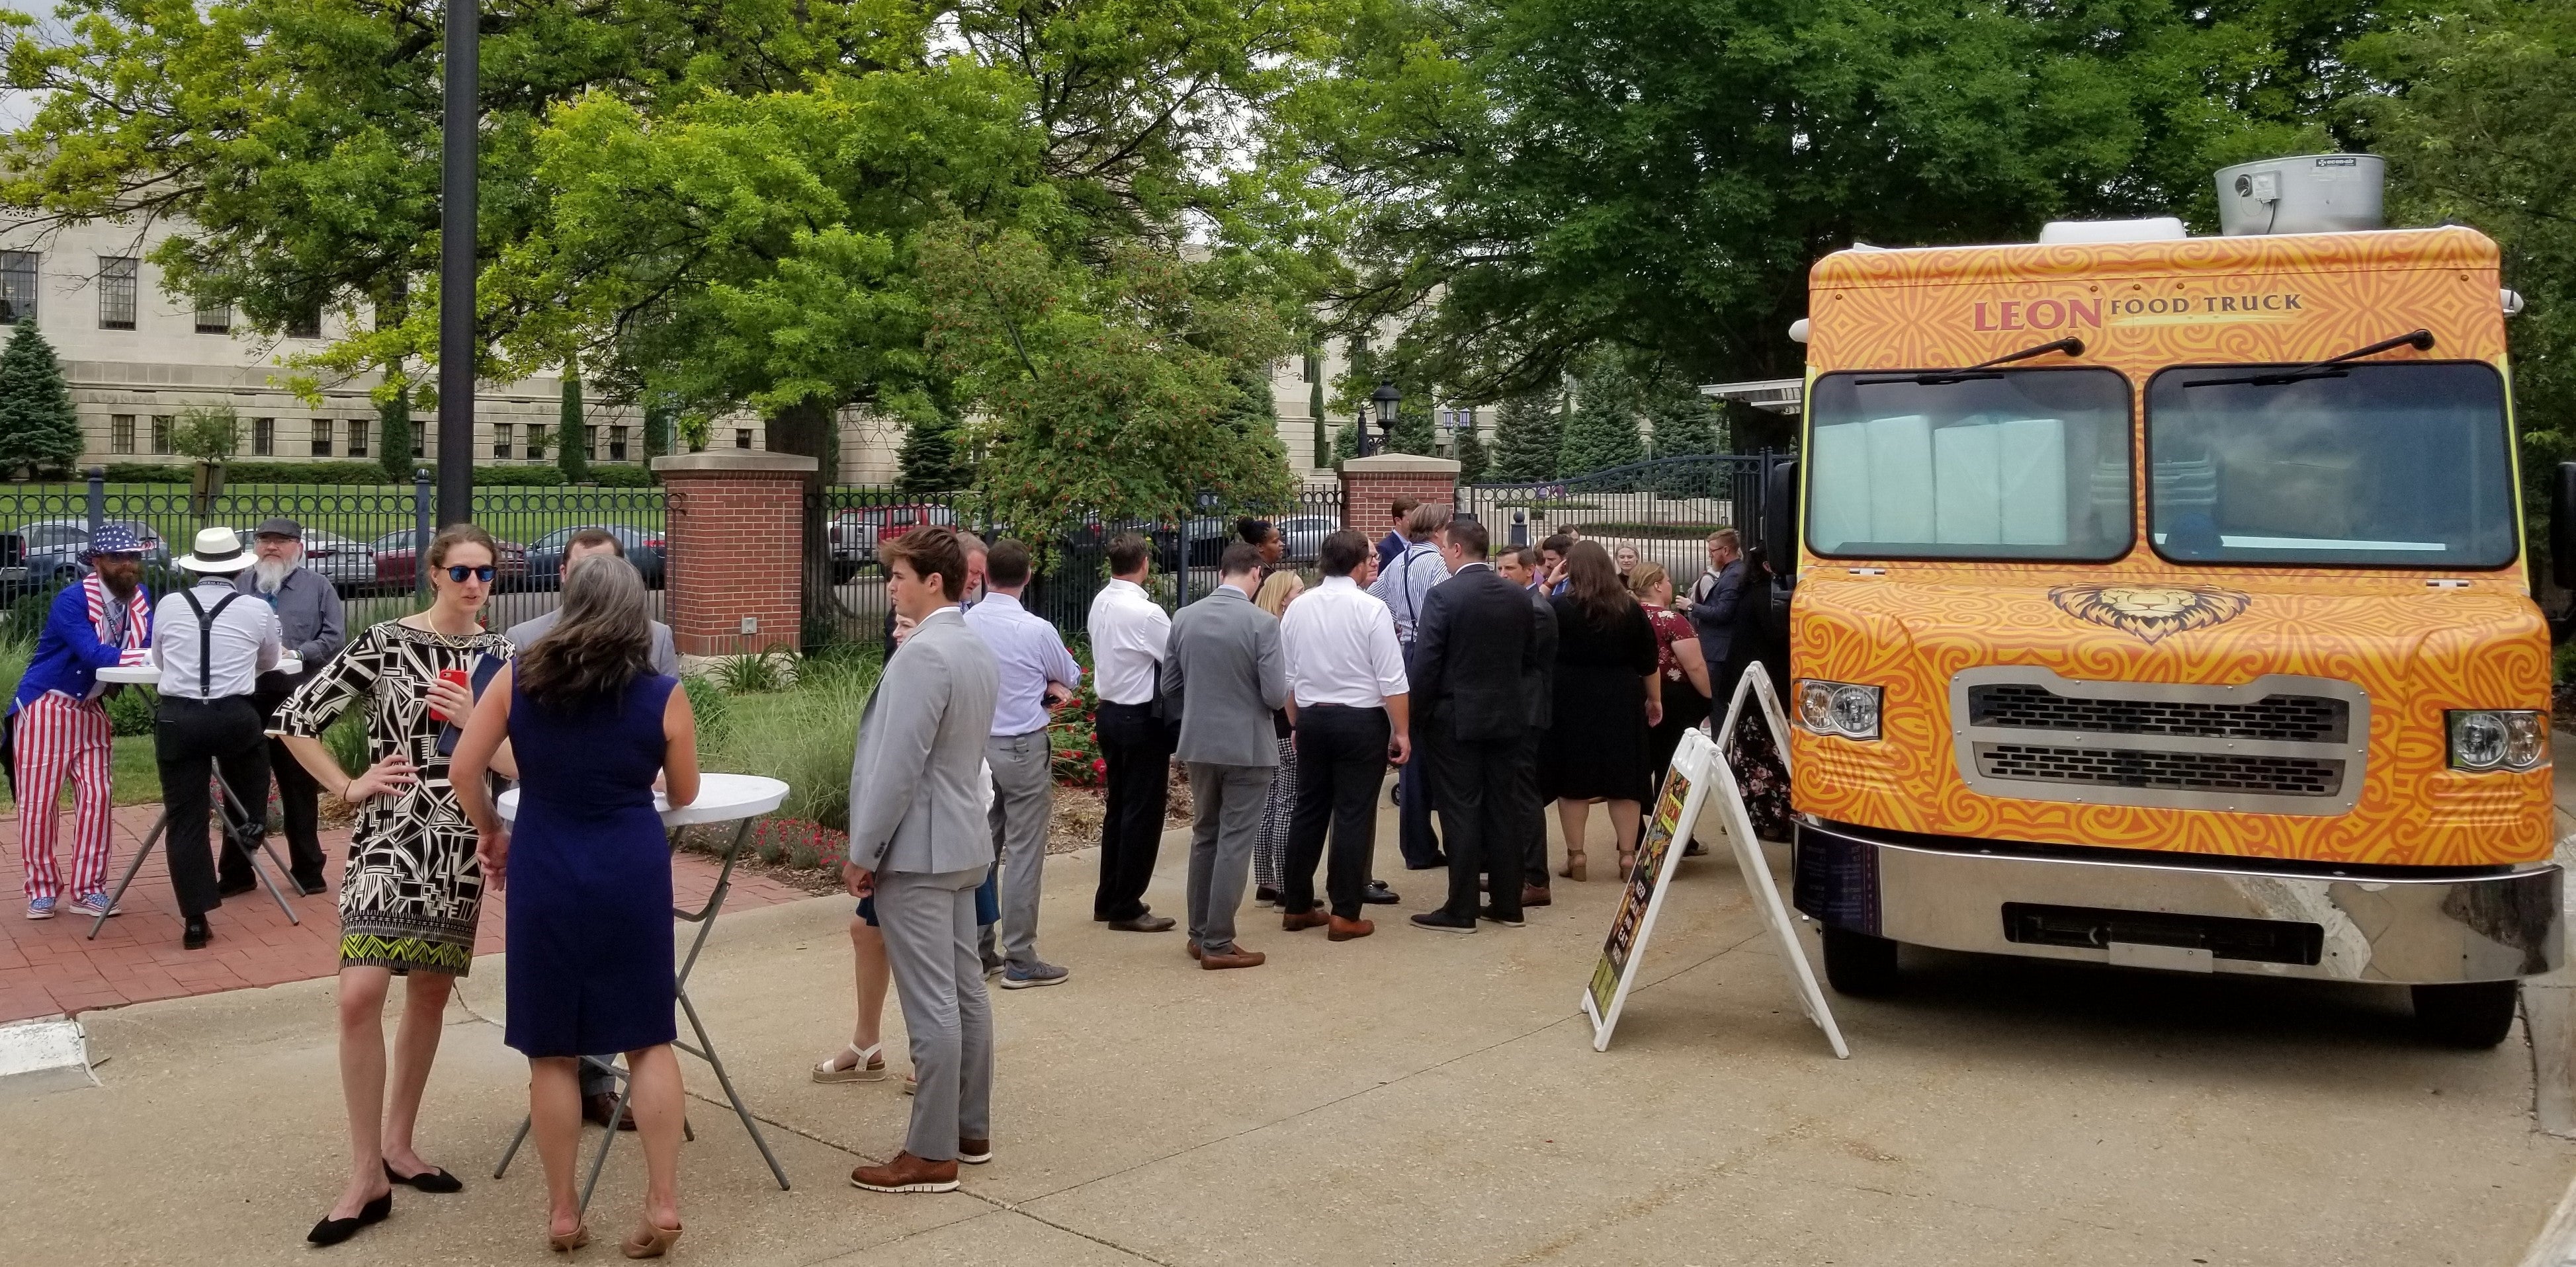 E15 Food Truck Serves Guests, as Governor Pillen Signs LB562